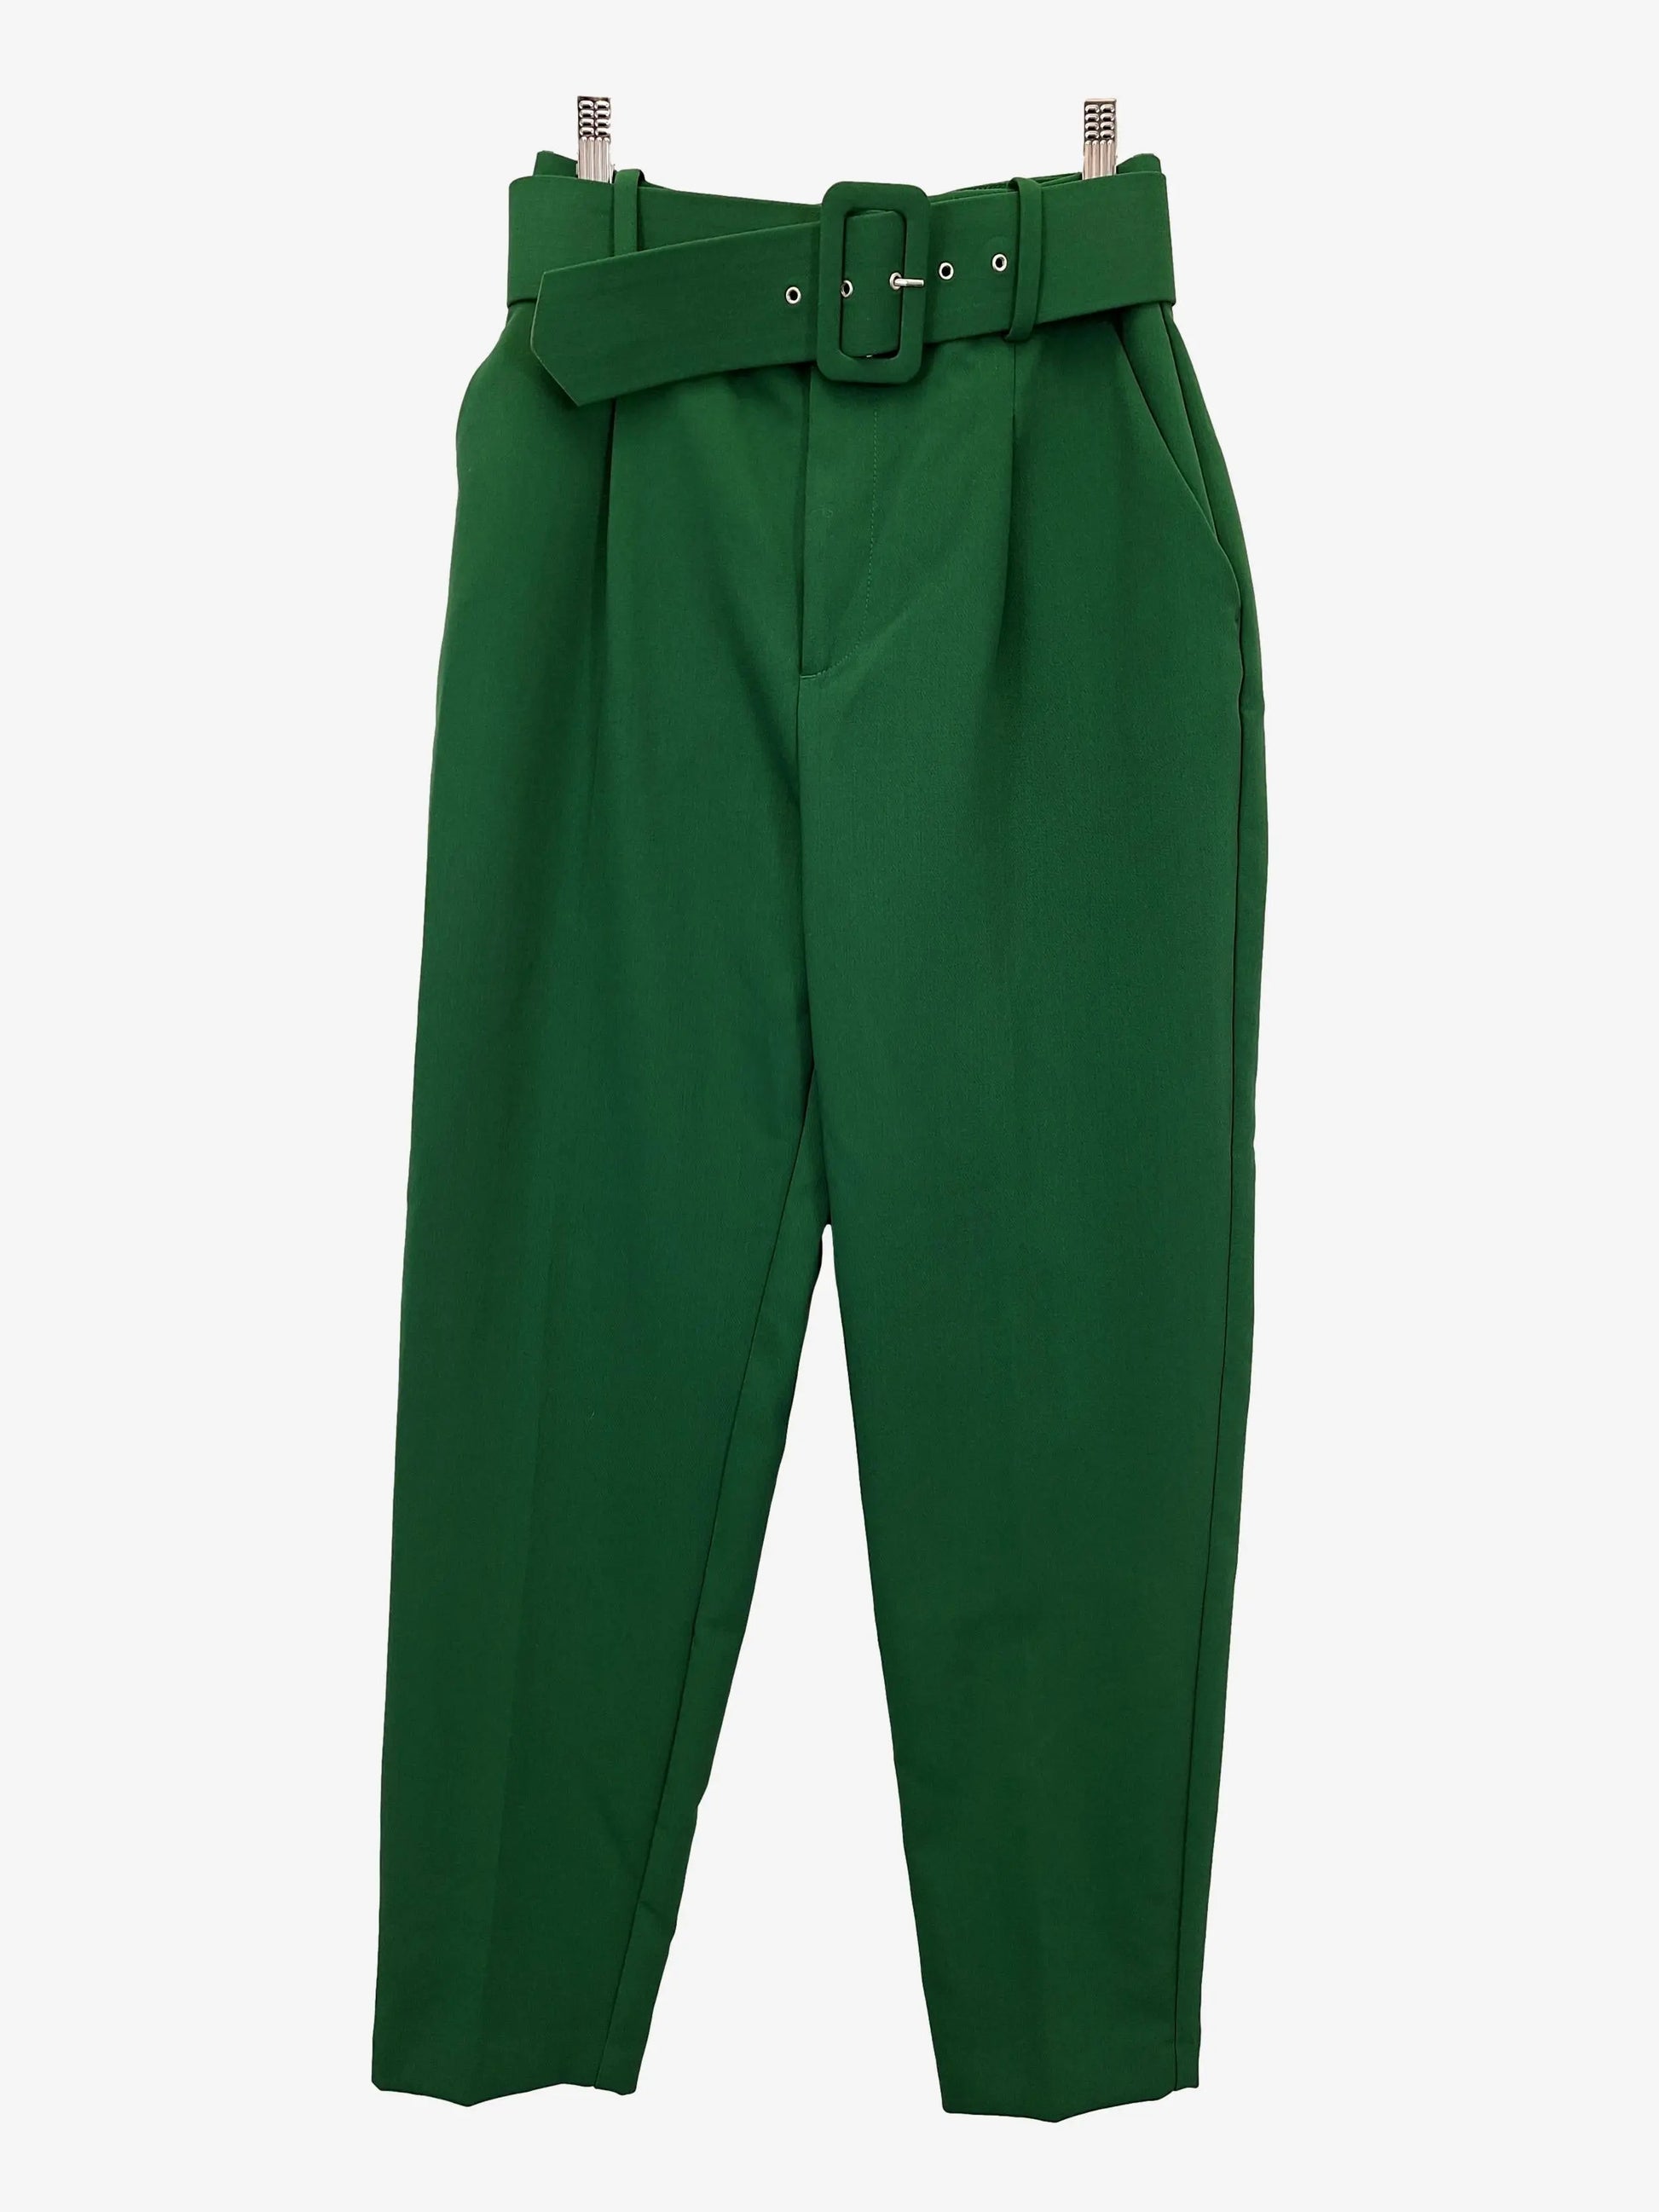 Zara Trousers & Pants for Women on sale - Outlet